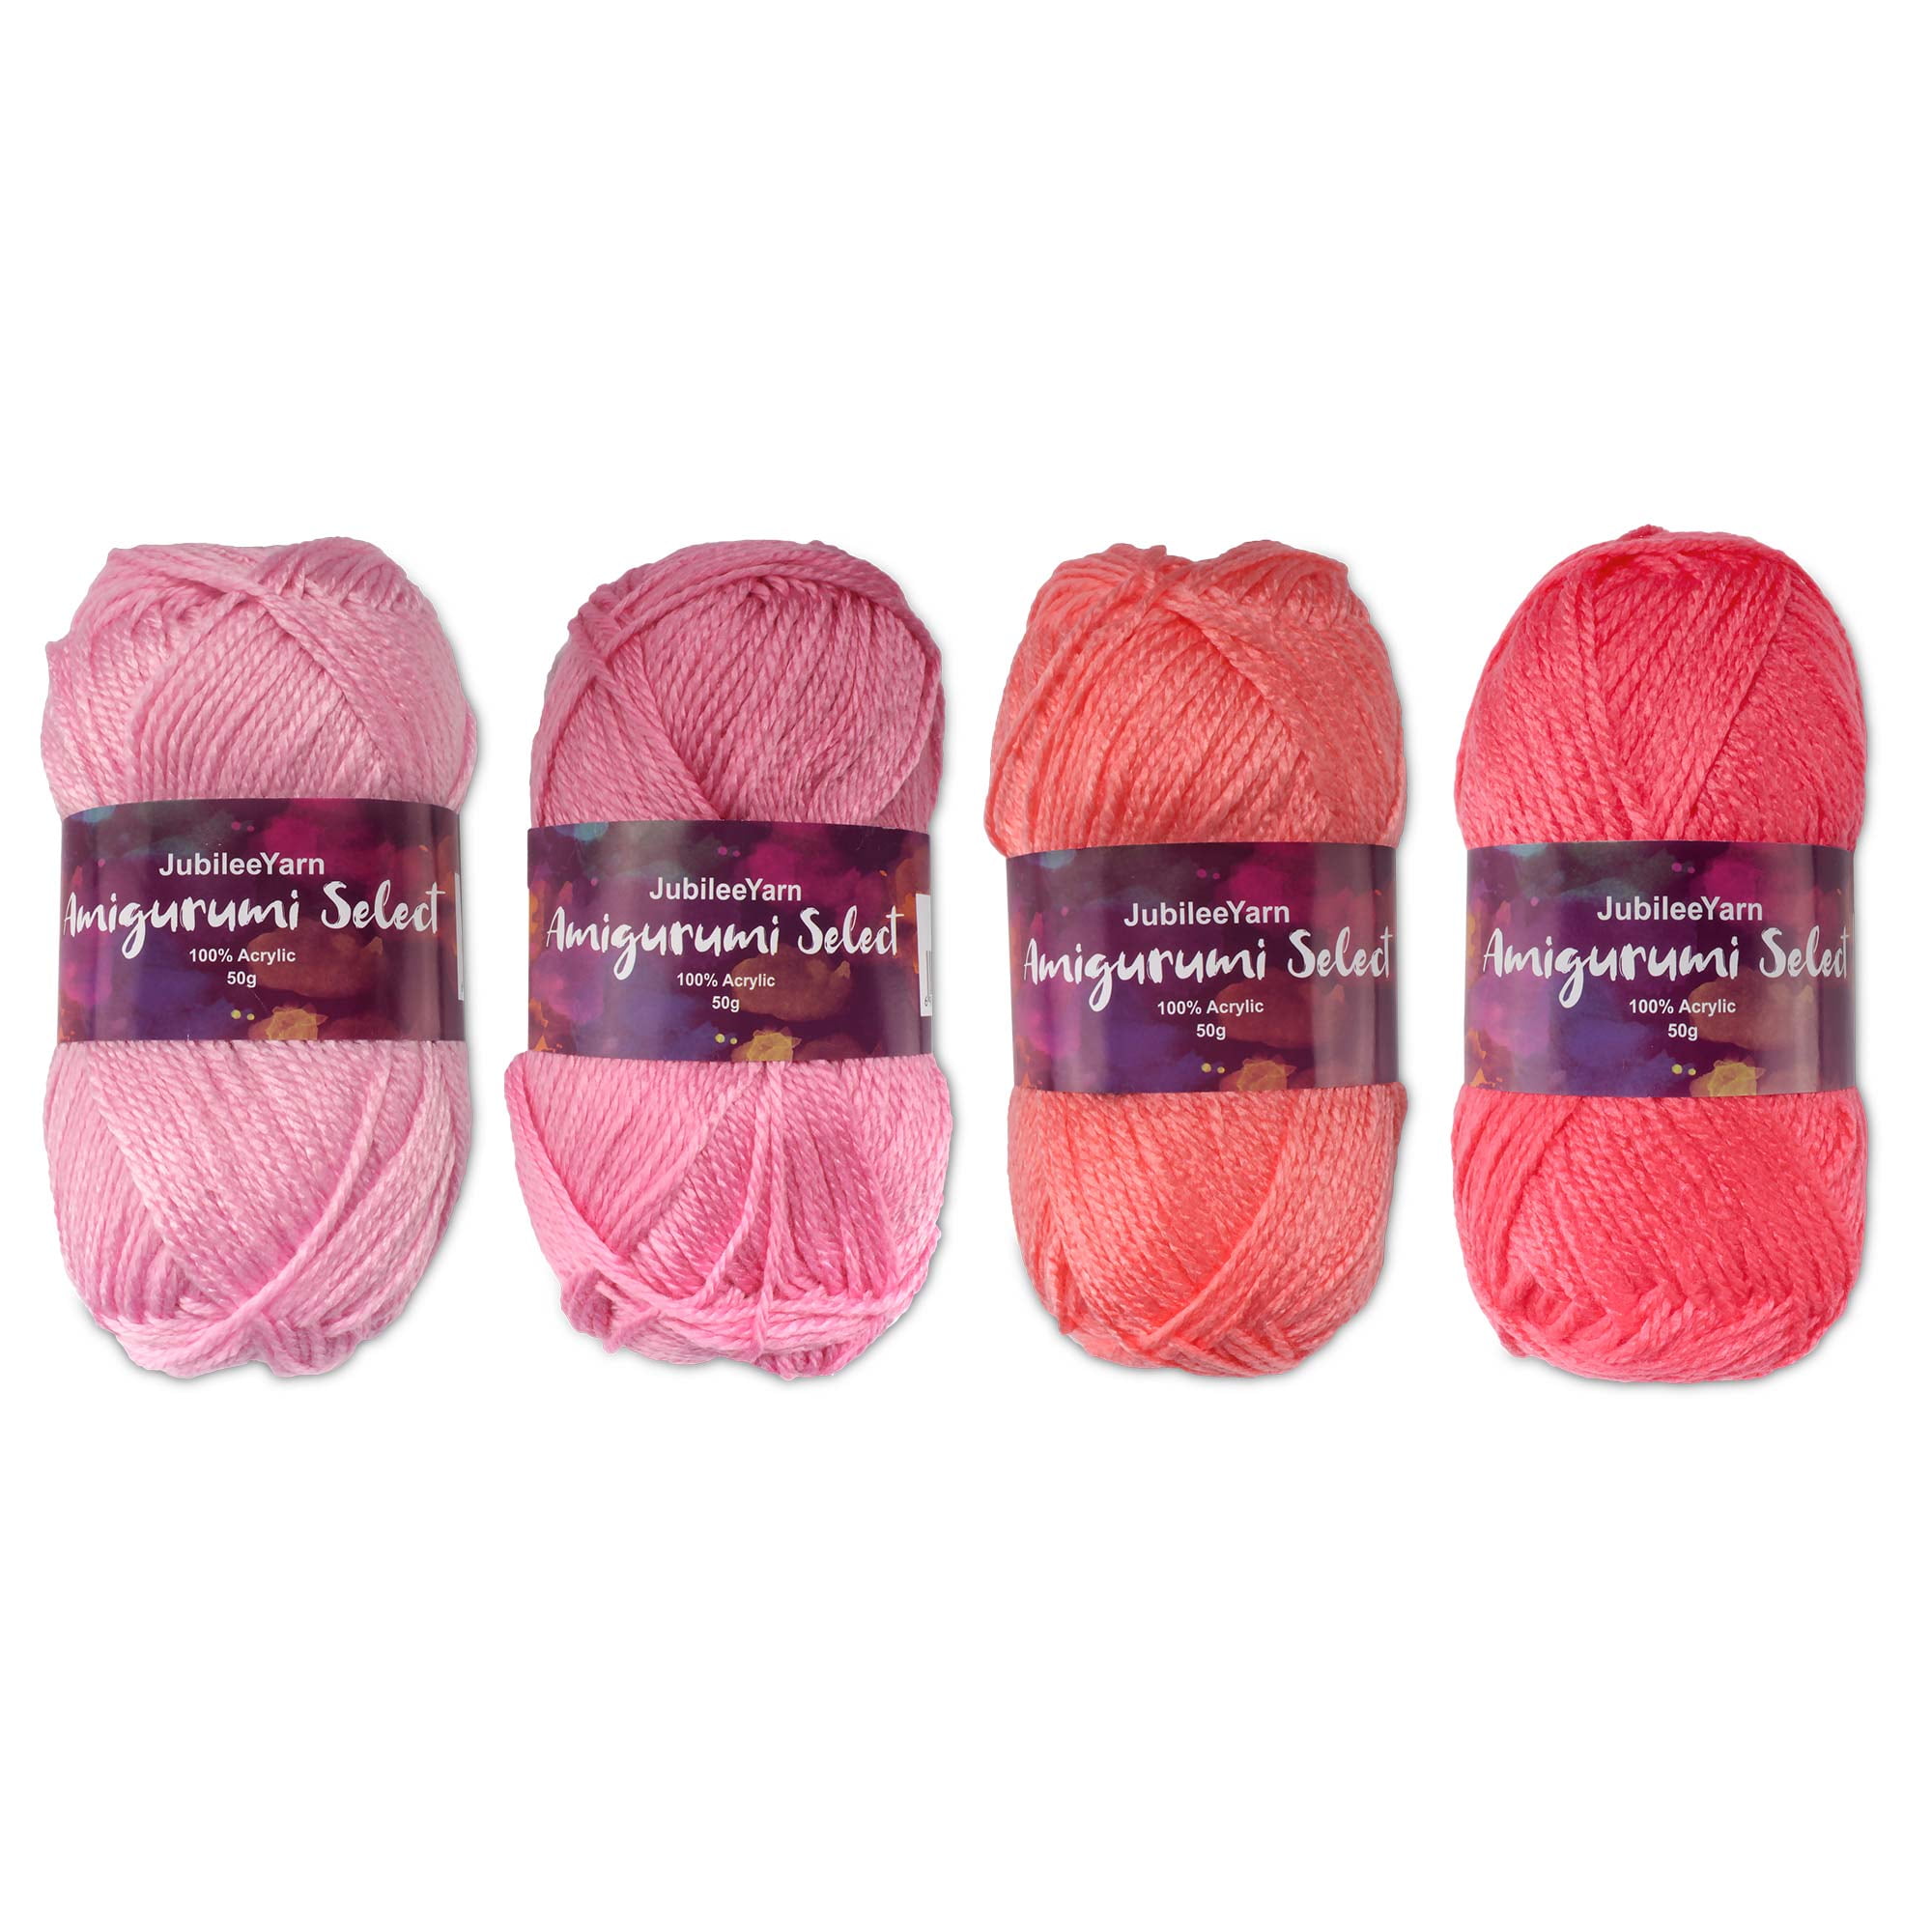 Amigurumi Select 100% Acrylic Craft Yarn - Crochet and Knitting Projects -  Assorted Colors - Surprise Pack - 12 x 50g Skeins Total 1500 yds. 